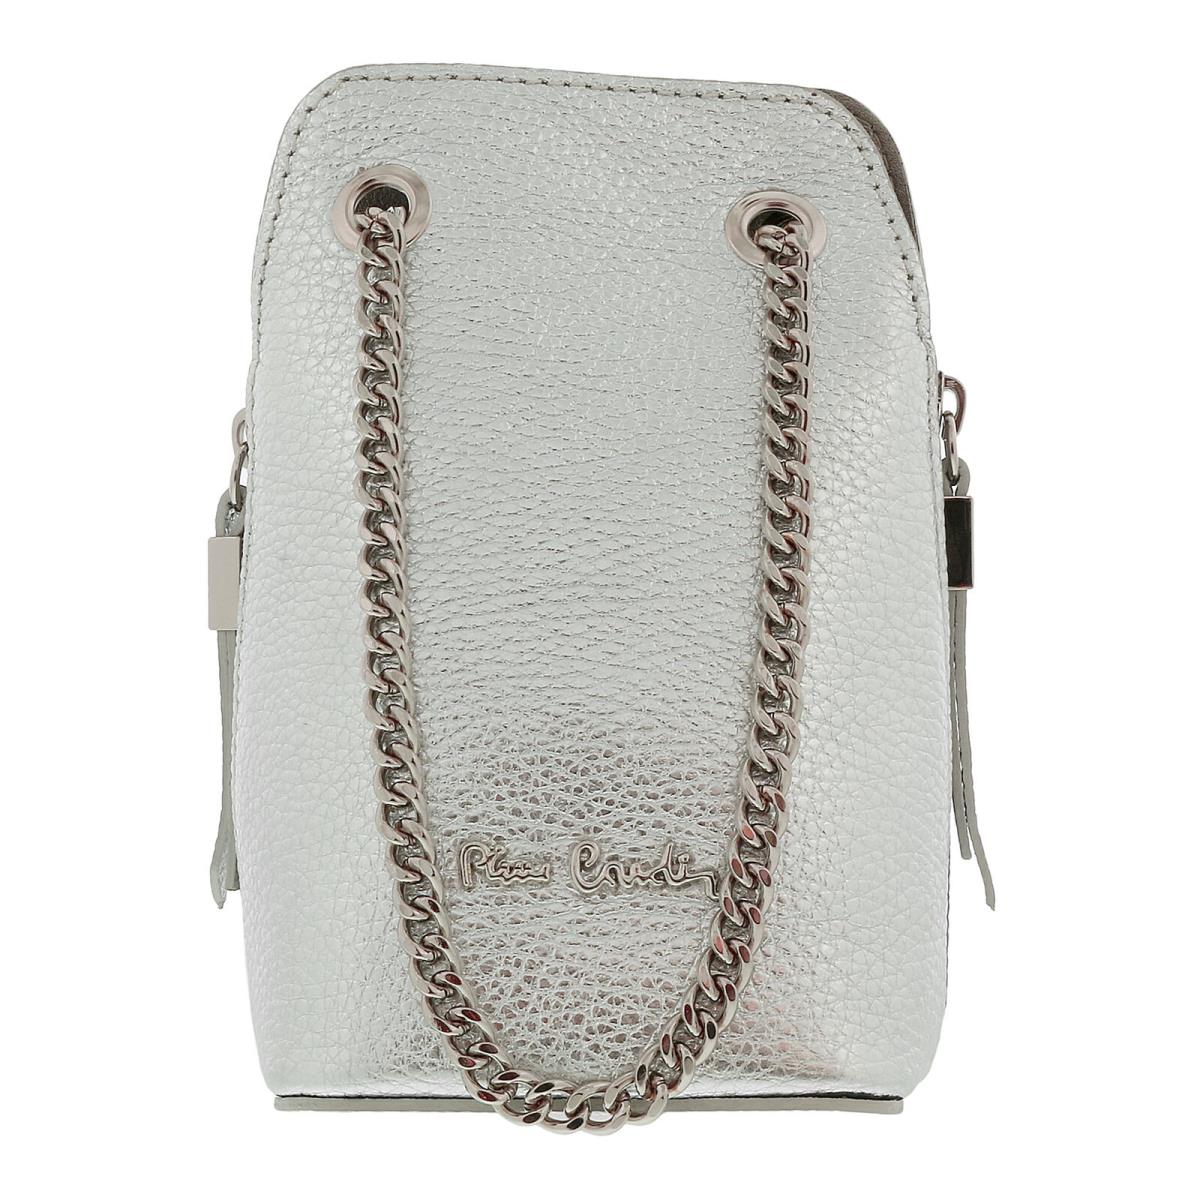 Pierre Cardin Silver Leather Curved Structured Chain Crossbody Bag